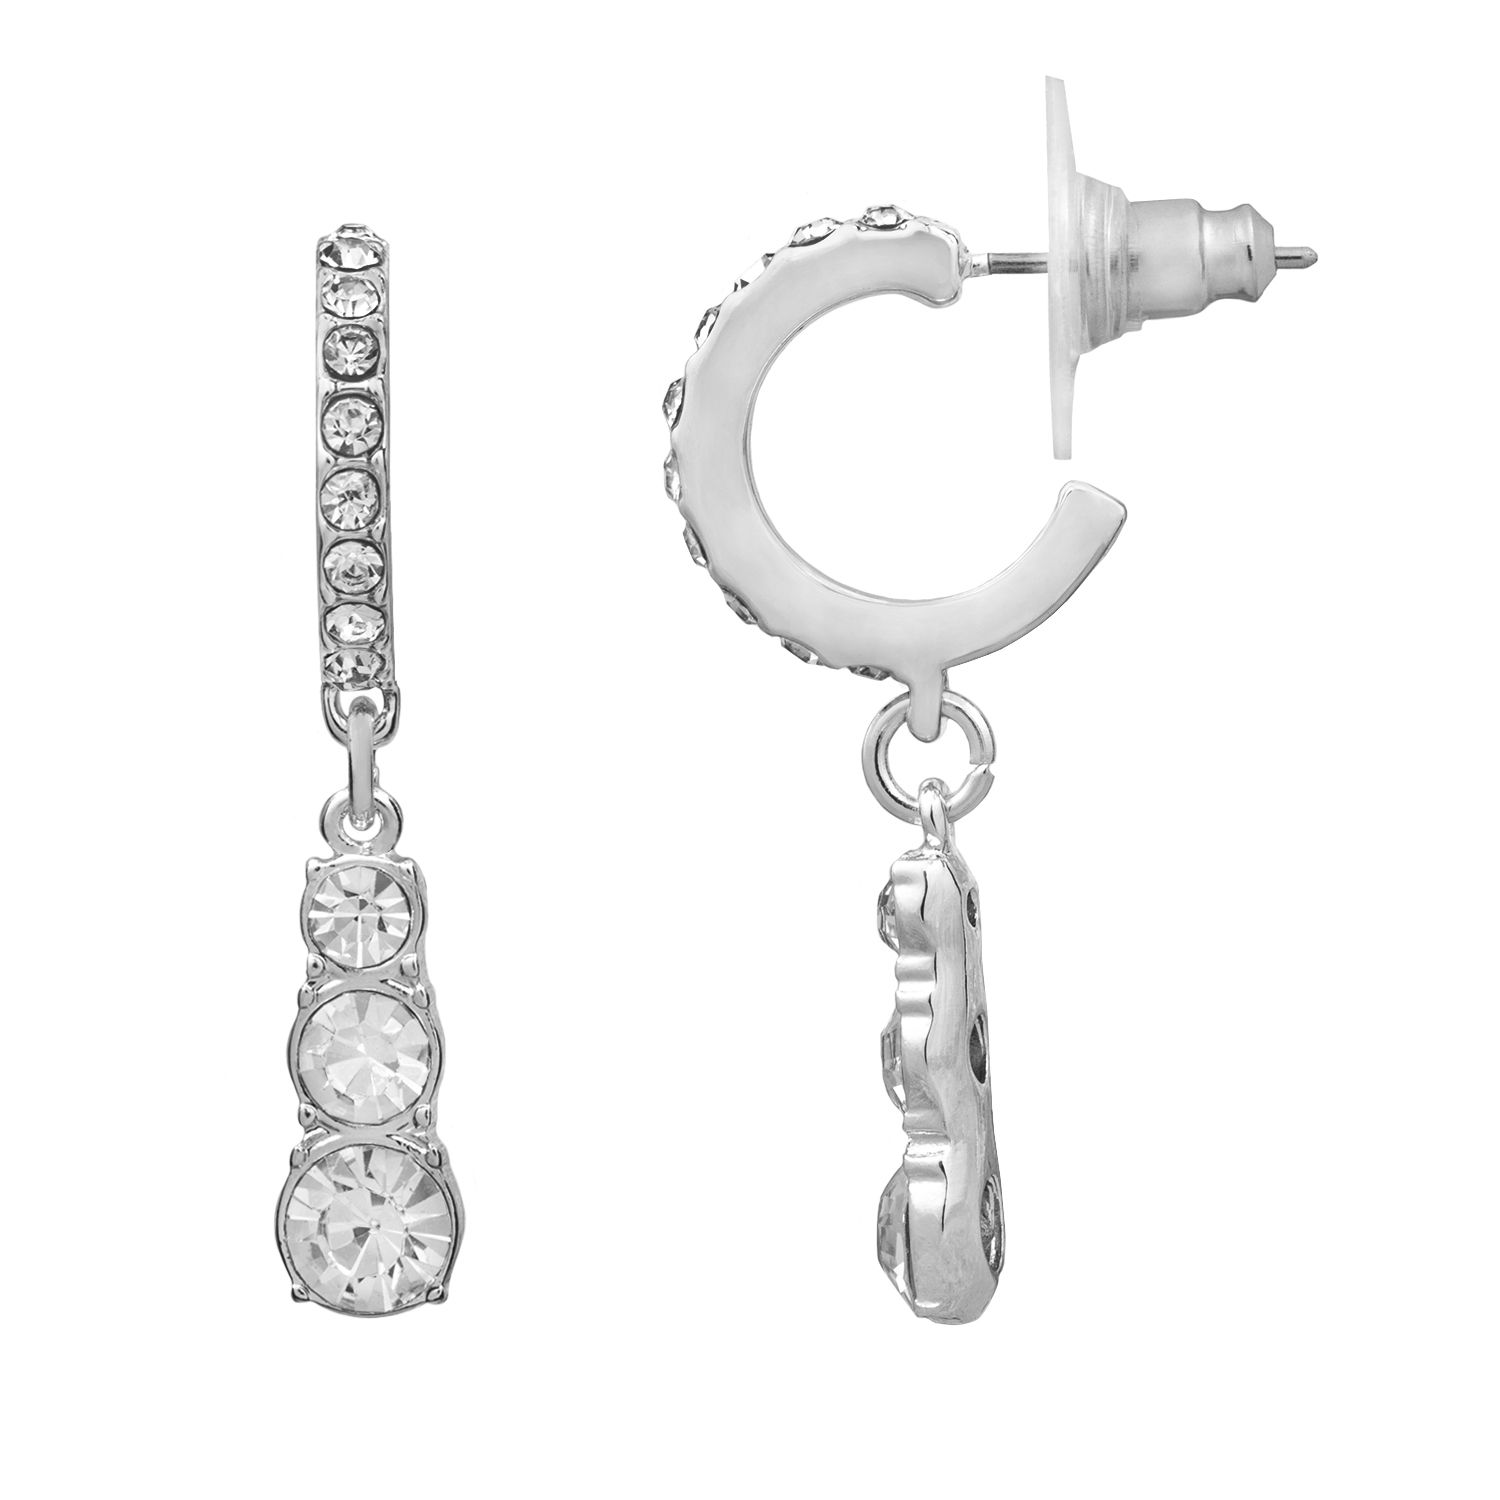 Image for LC Lauren Conrad Nickel Free Pave Hoop Earrings with Tiered Simulated Crystal Drops at Kohl's.